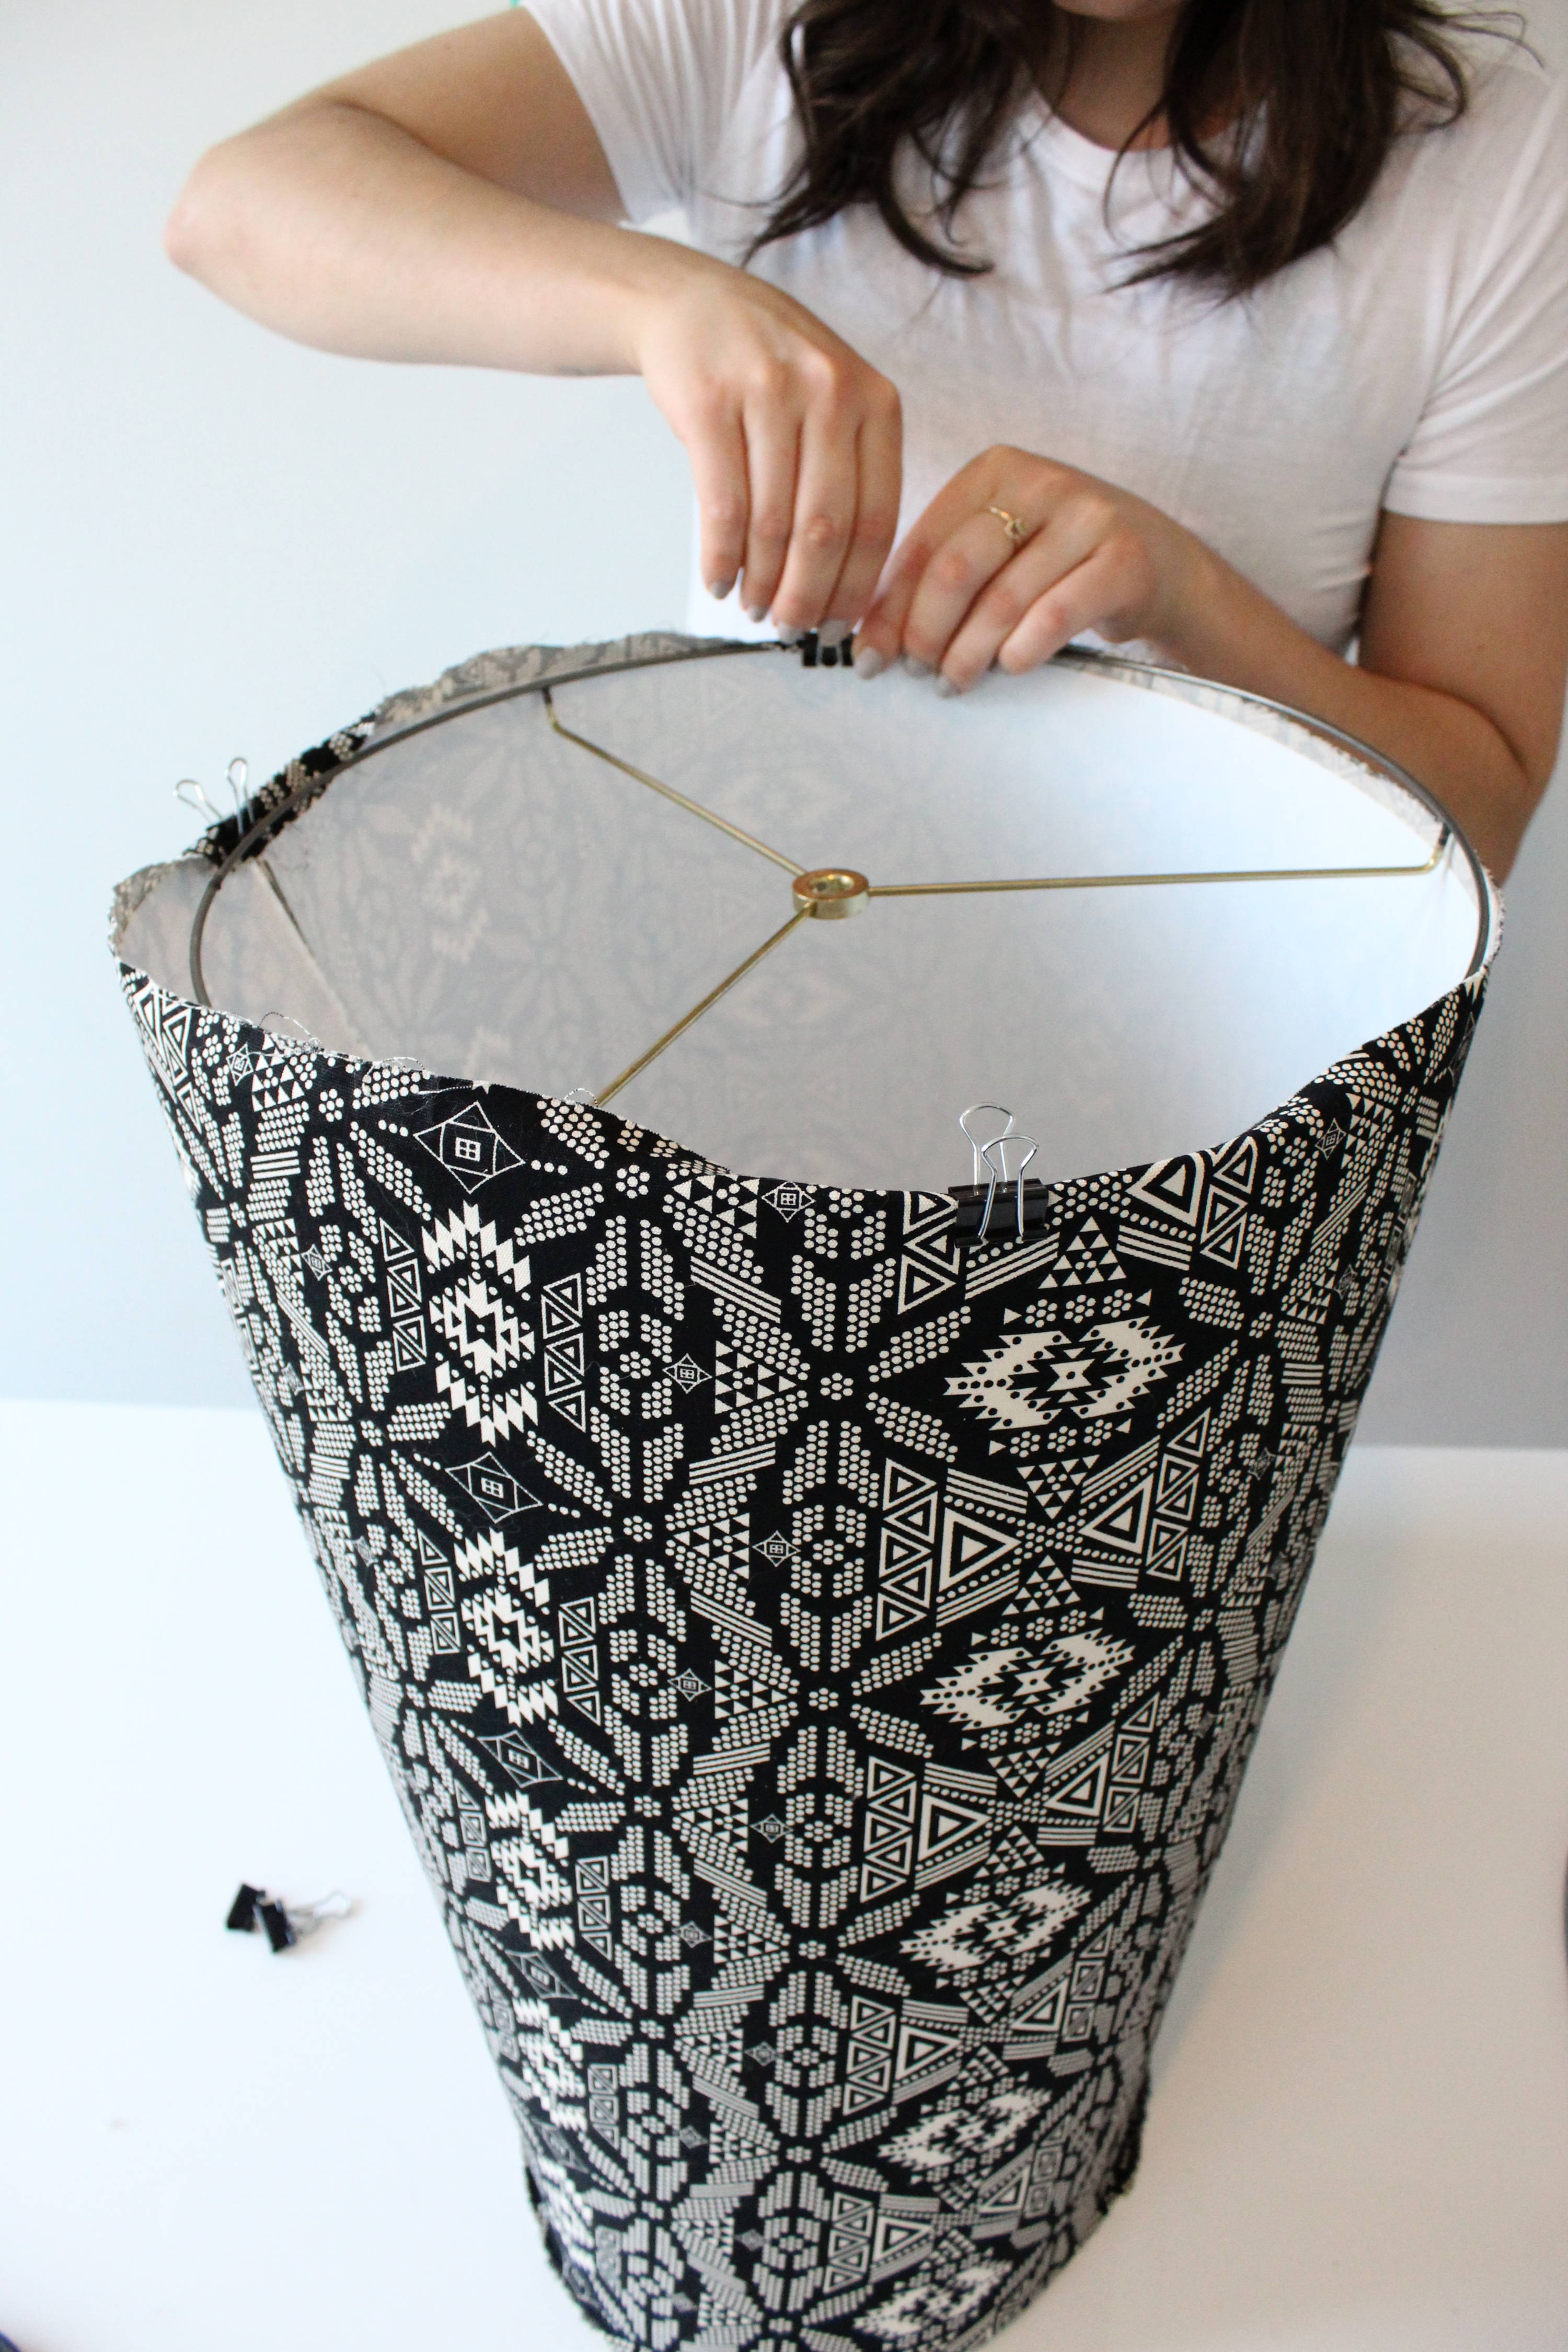 Making a DIY lampshade from scratch may seem like a daunting prospect, but with an easy to follow lampshade tutorial, you'll see that it's easy as pie! #diylampshade #lampshade #diyhomedeocr